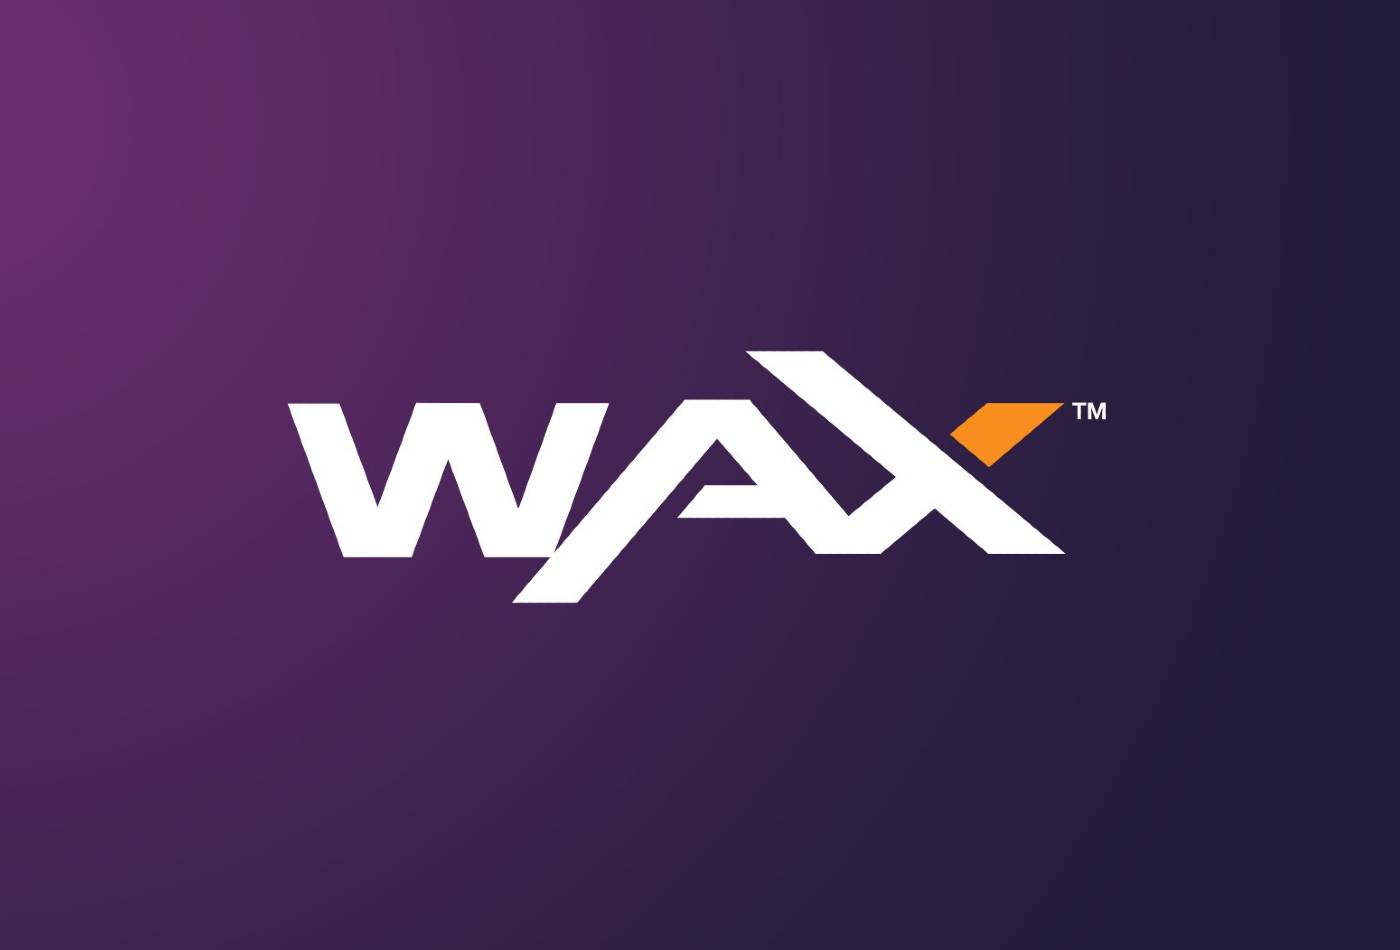 WAX (WAXP) Price Prediction 2022-2030: The Best Time To Buy